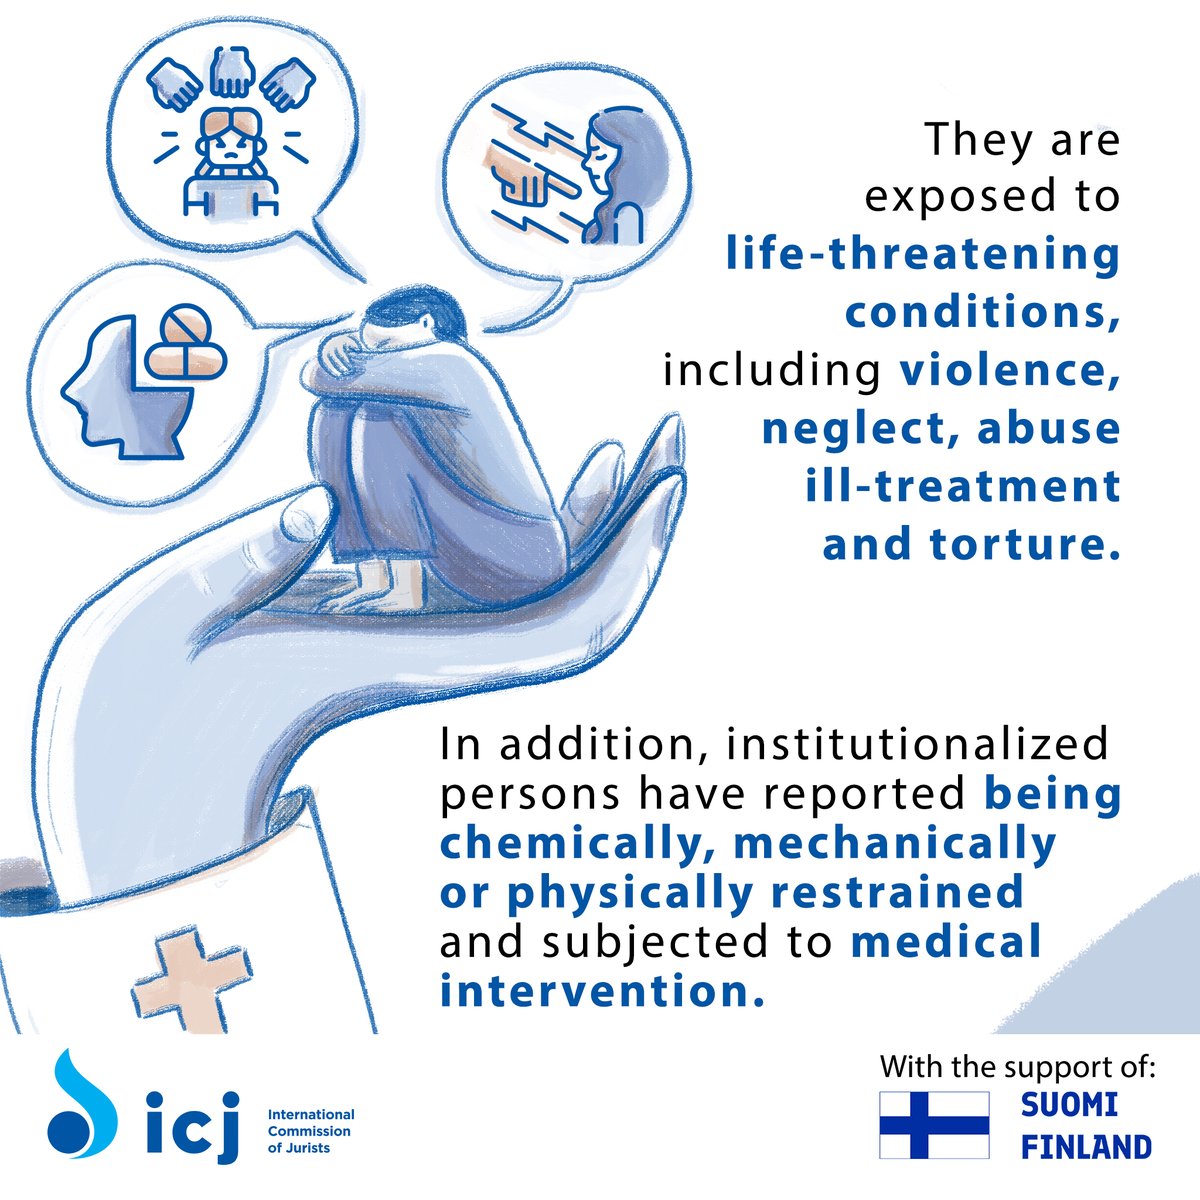 2/2 📄 The Deinstitutionalization Guidelines (#DIguidelines) are grounded in these experiences, serving as the basis for the closure of institutions and preventing institutionalization: ohchr.org/en/documents/l… #disabilityrights #deinstitutionalization